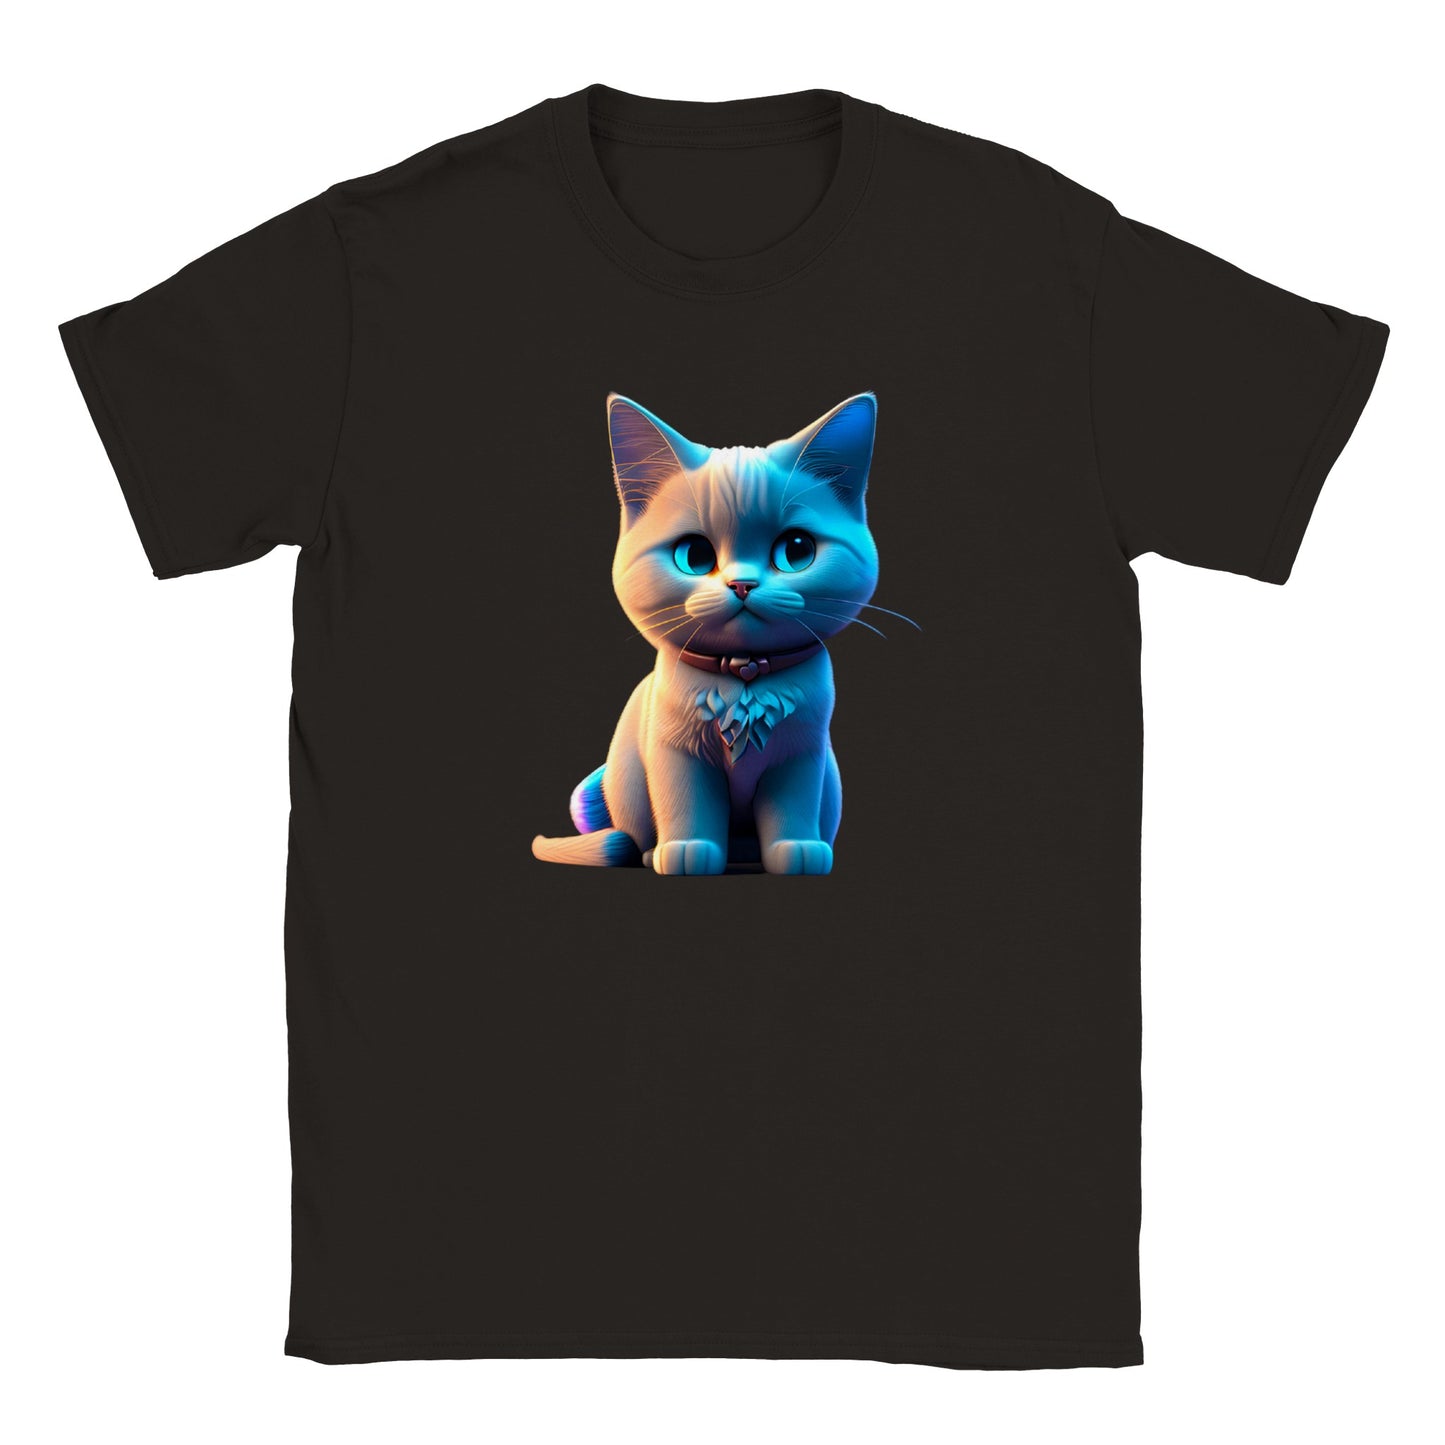 Adorable, Cool, Cute Cats and Kittens Toy - Classic Kids Crewneck T-Shirt 34